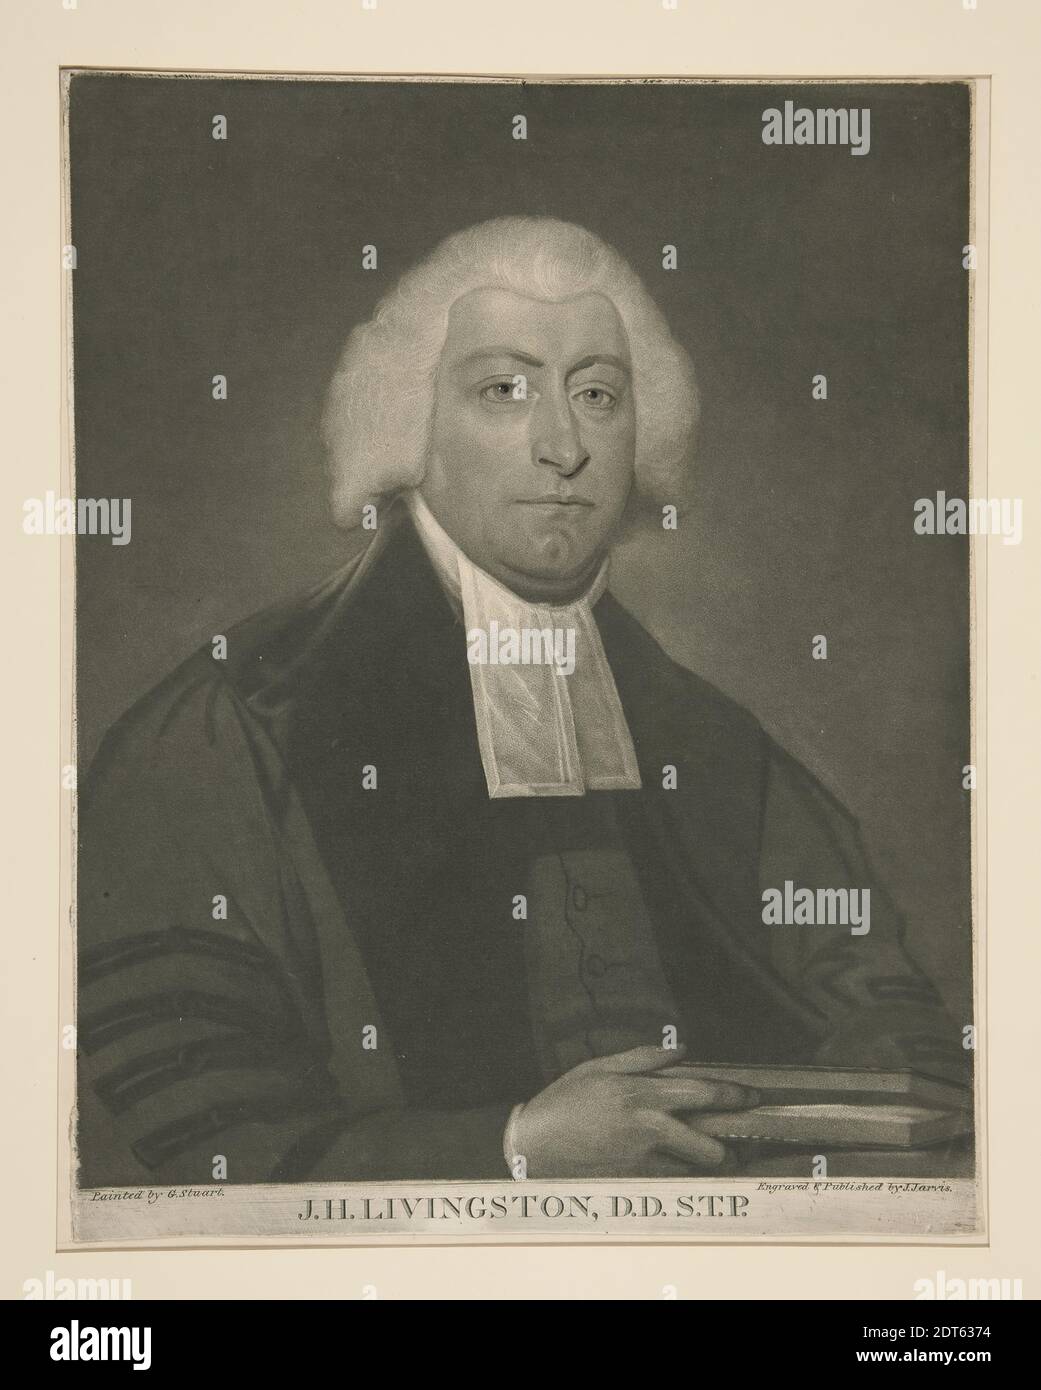 Engraver: John Wesley Jarvis, American, born England, 1780–1840, After: Gilbert Stuart, American, 1755–1828, J.H. Livingston, D.D., S.T.P., Mezzotint engraving, black and white, sheet: 26.4 × 20.8 cm (10 3/8 × 8 3/16 in.), Made in United States, American, 18th century, Works on Paper - Prints Stock Photo